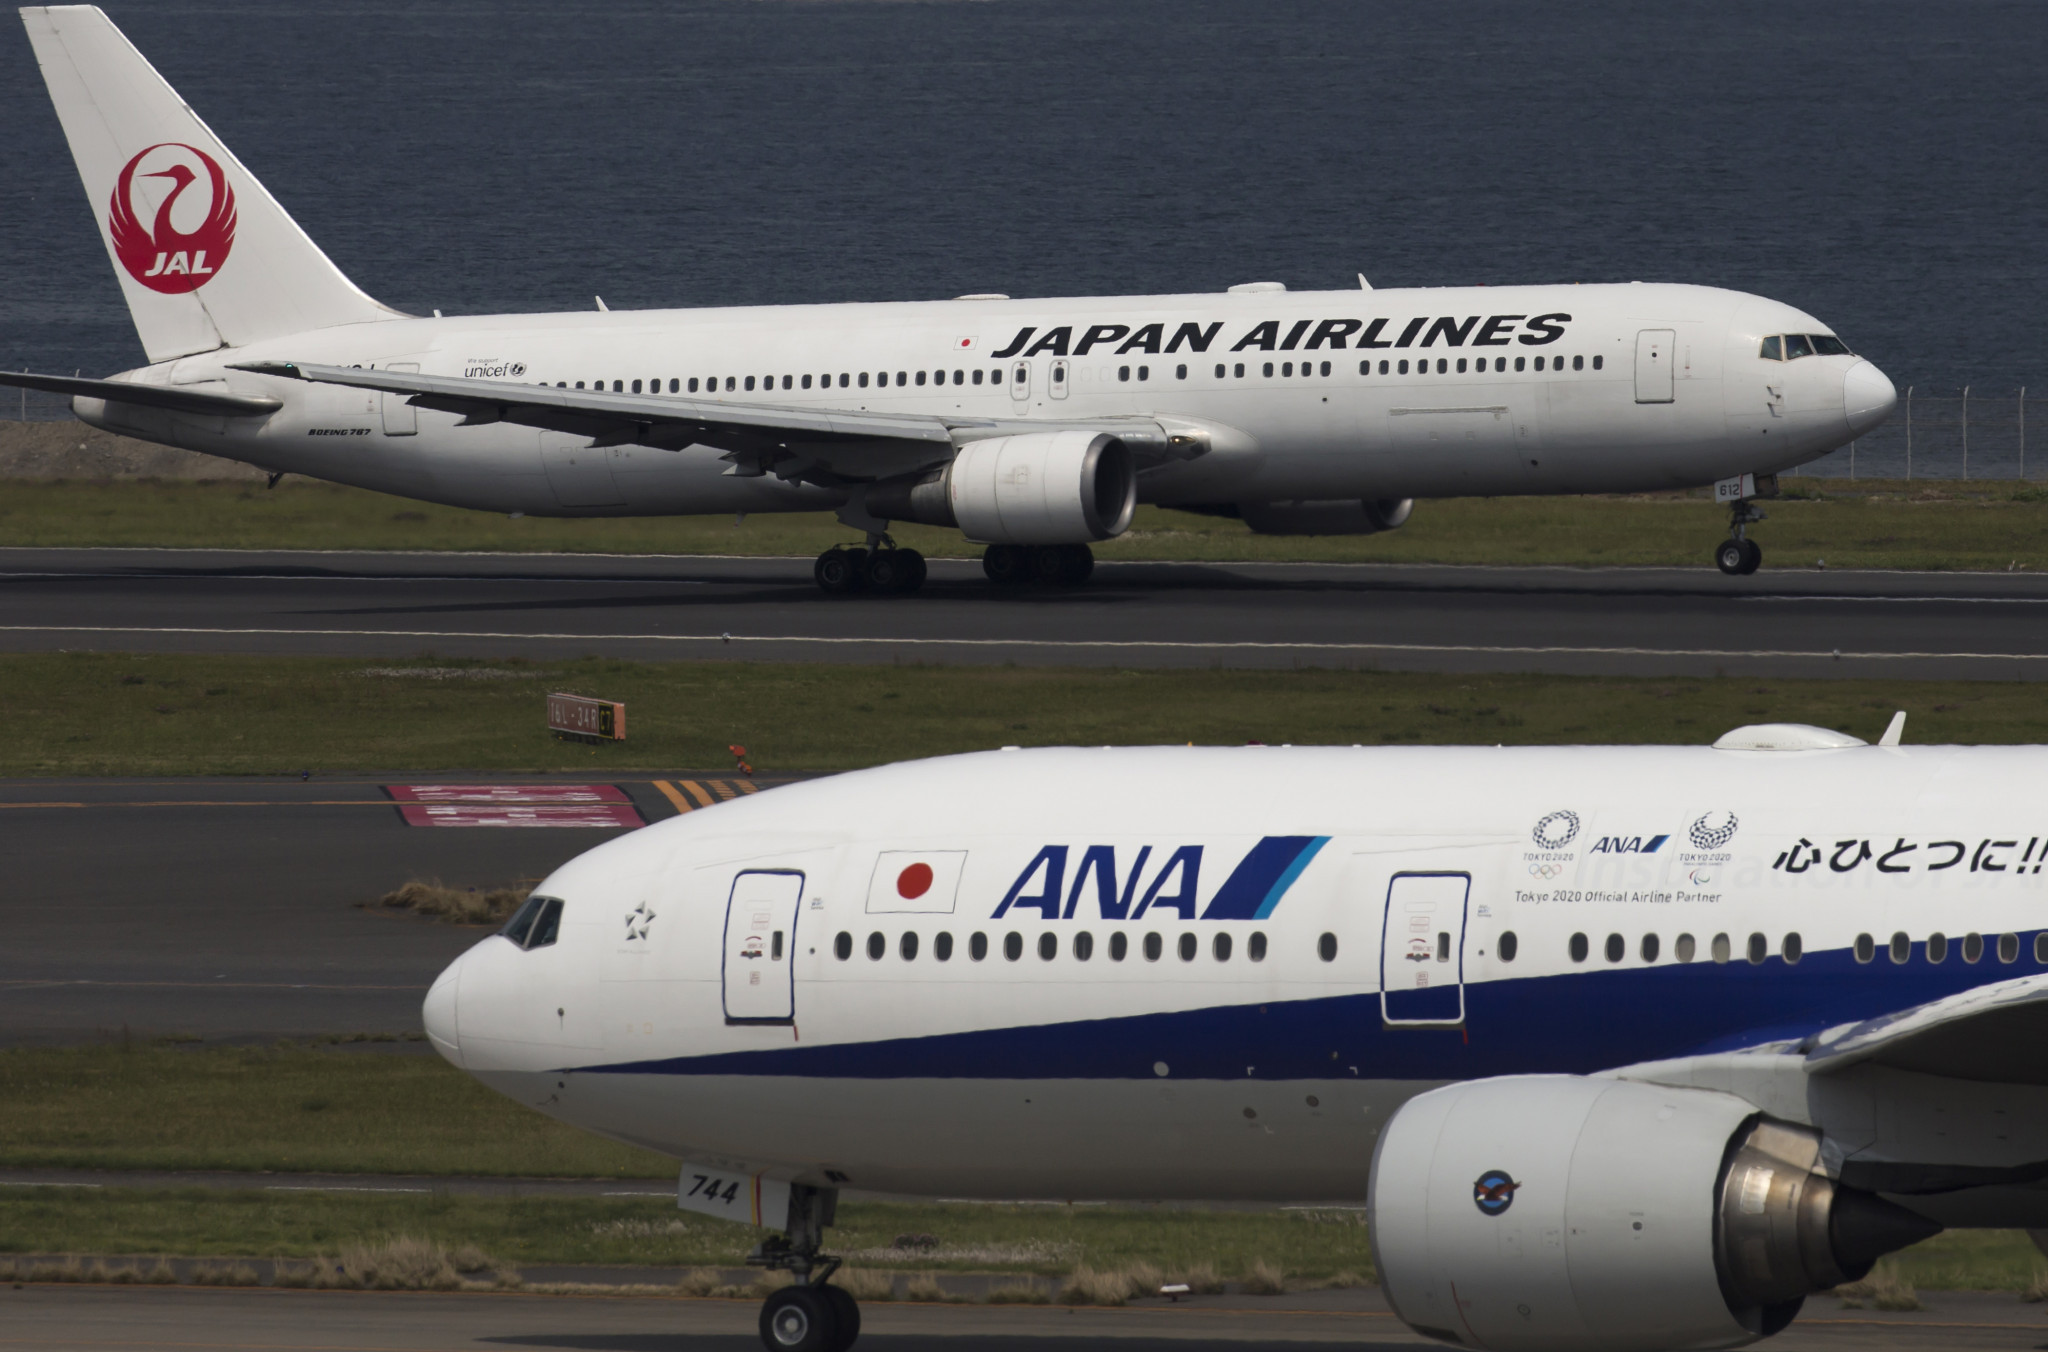 Tokyo 2020 has announced today that it has concluded an agreement with All Nippon Airways and Japan Airlines under which they will serve as supporting partners of the Olympic Torch Relay ©Getty Images